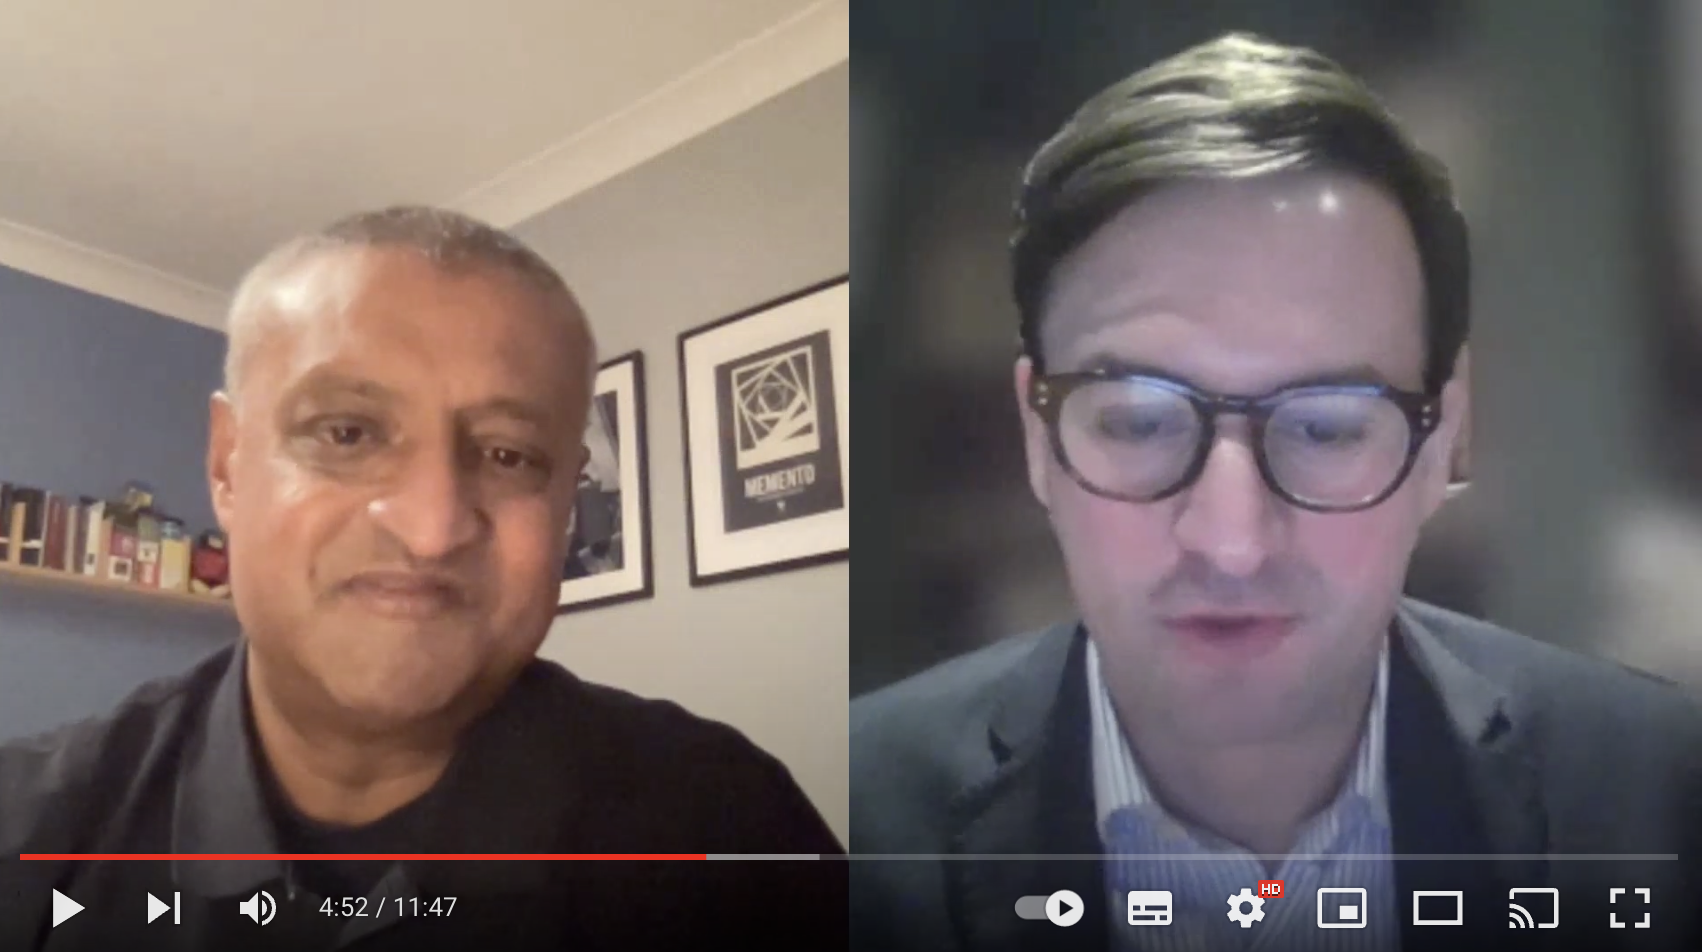 Videocall screenshot - November insights on policy.